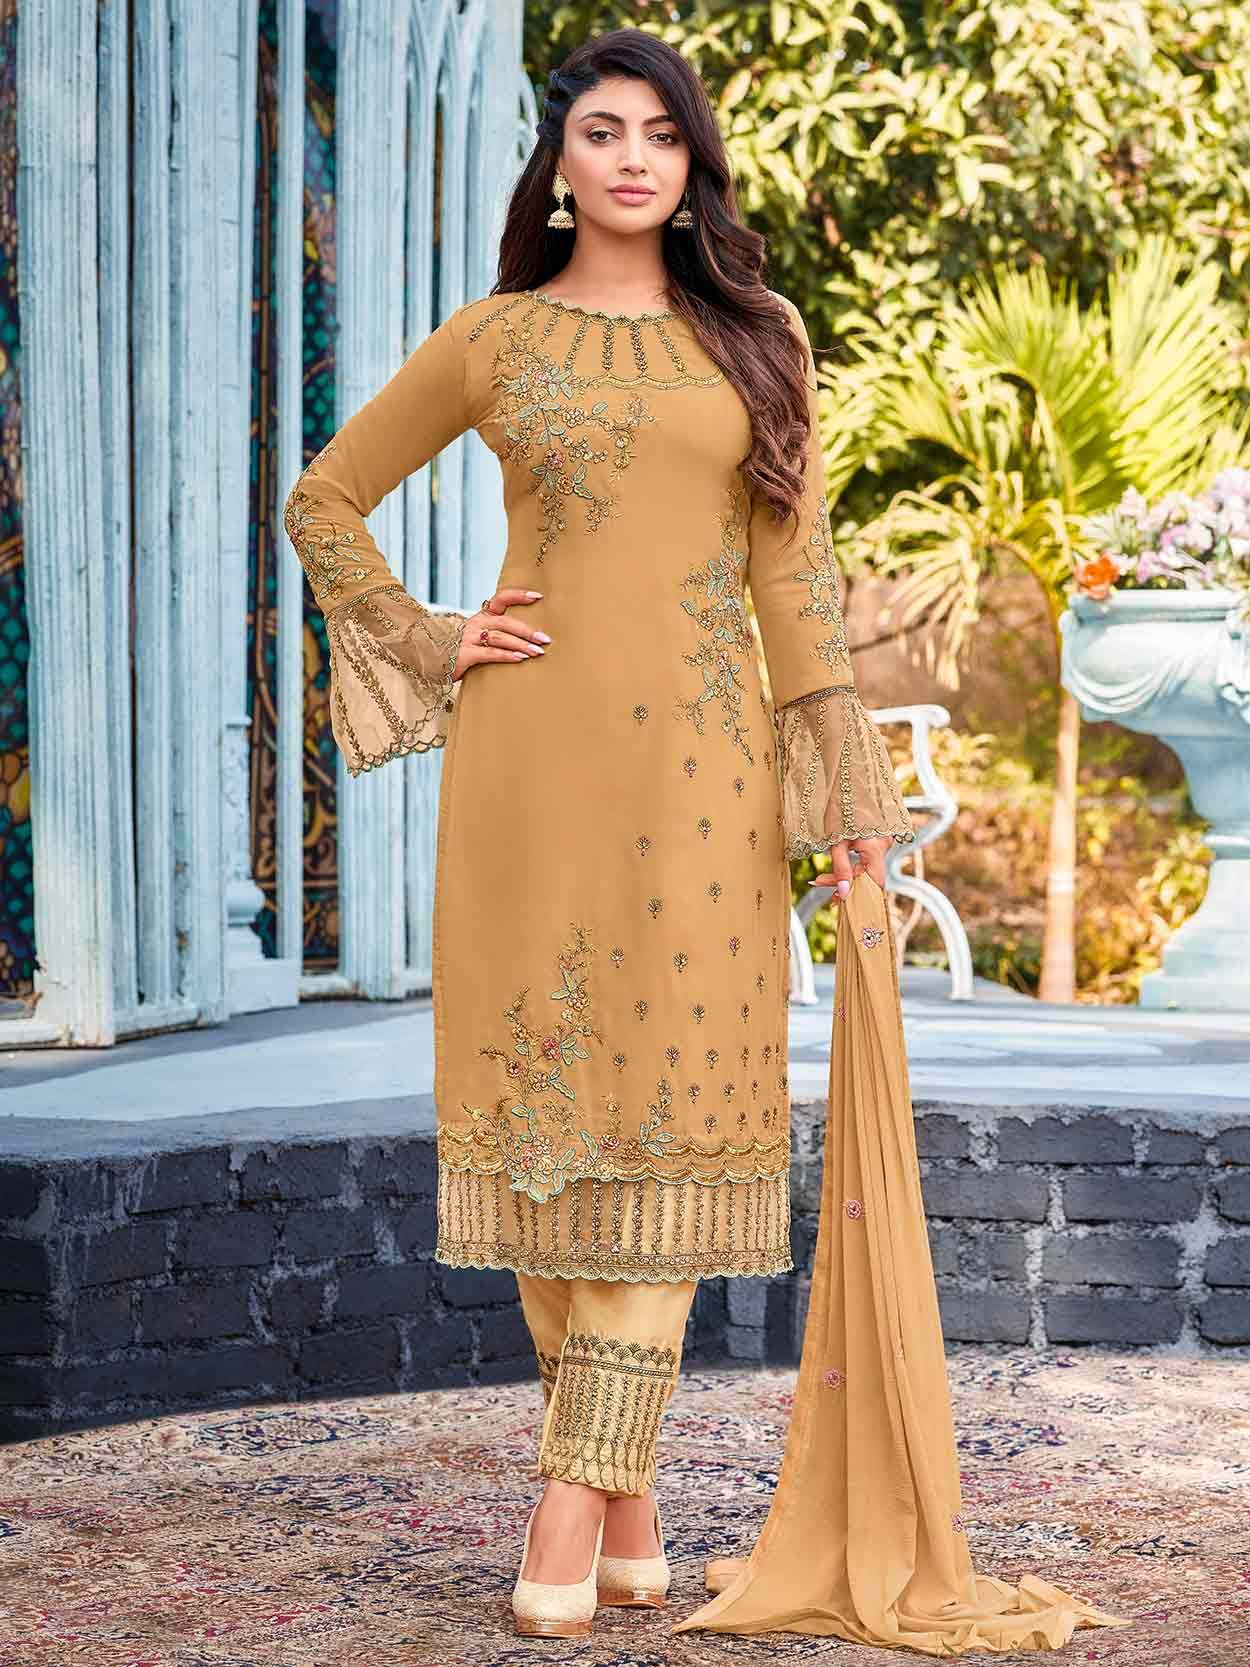 Canyon-Sunset Ayesha Trouser Salwar Kameez Suit with Zari-Embroidered  Flowers and Crystals | Exotic India Art